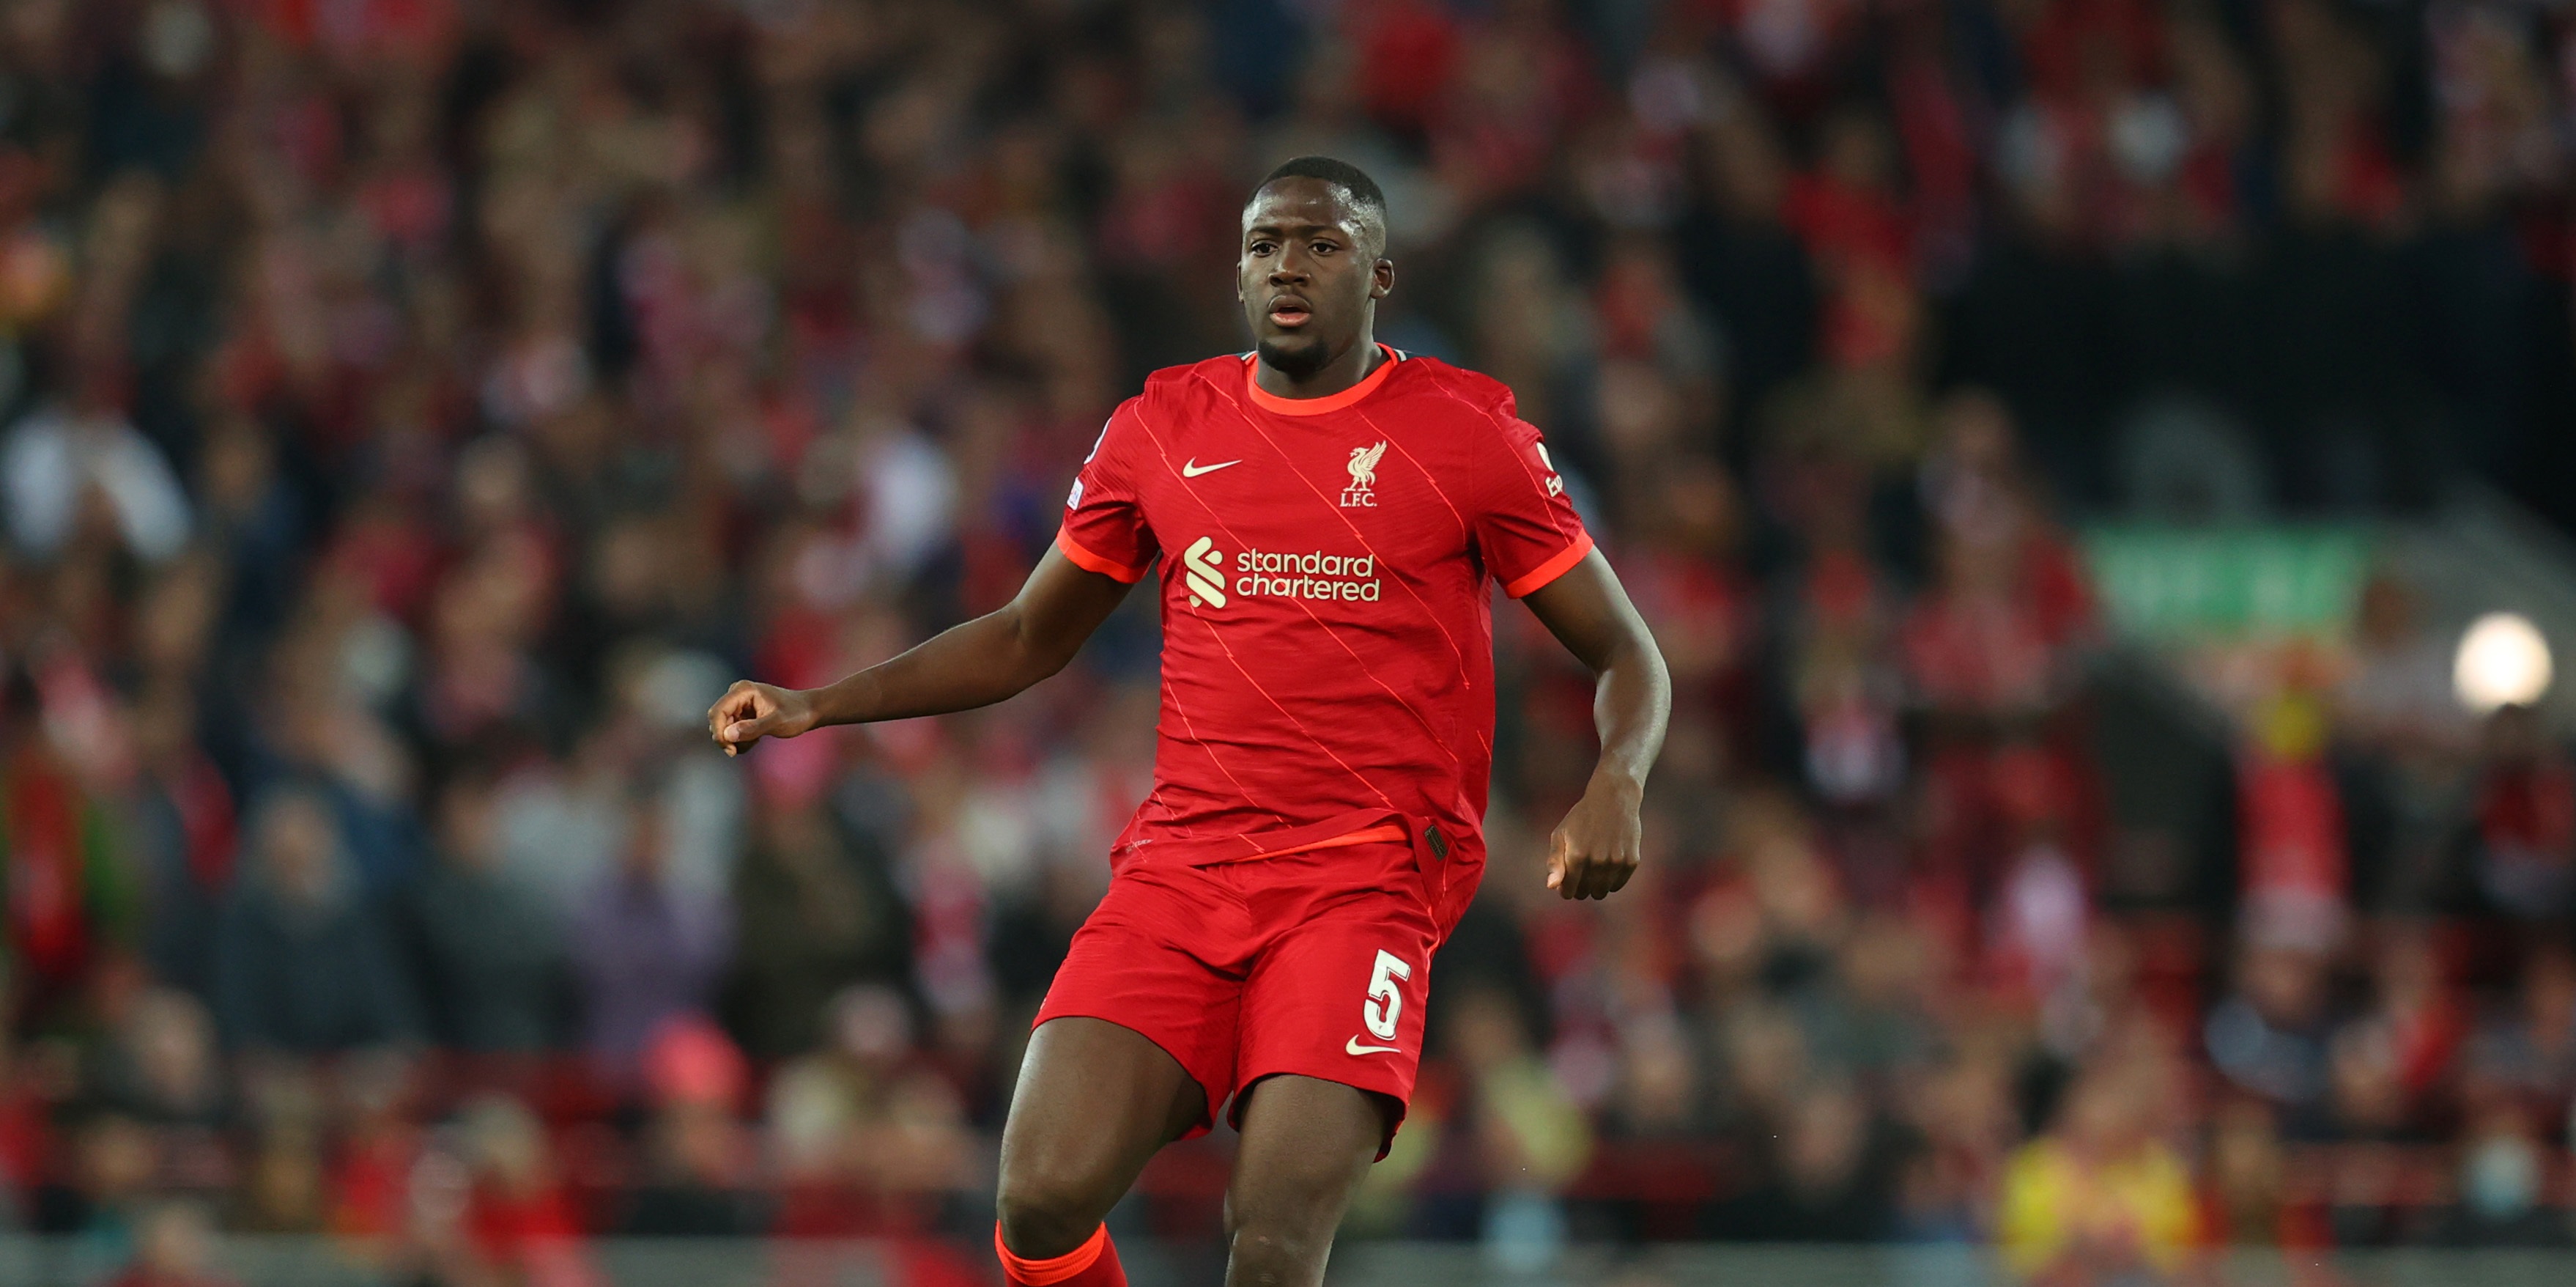 ‘He said to me’ – Ibrahima Konate reveals details of conversation he shared with Jurgen Klopp before signing for Liverpool